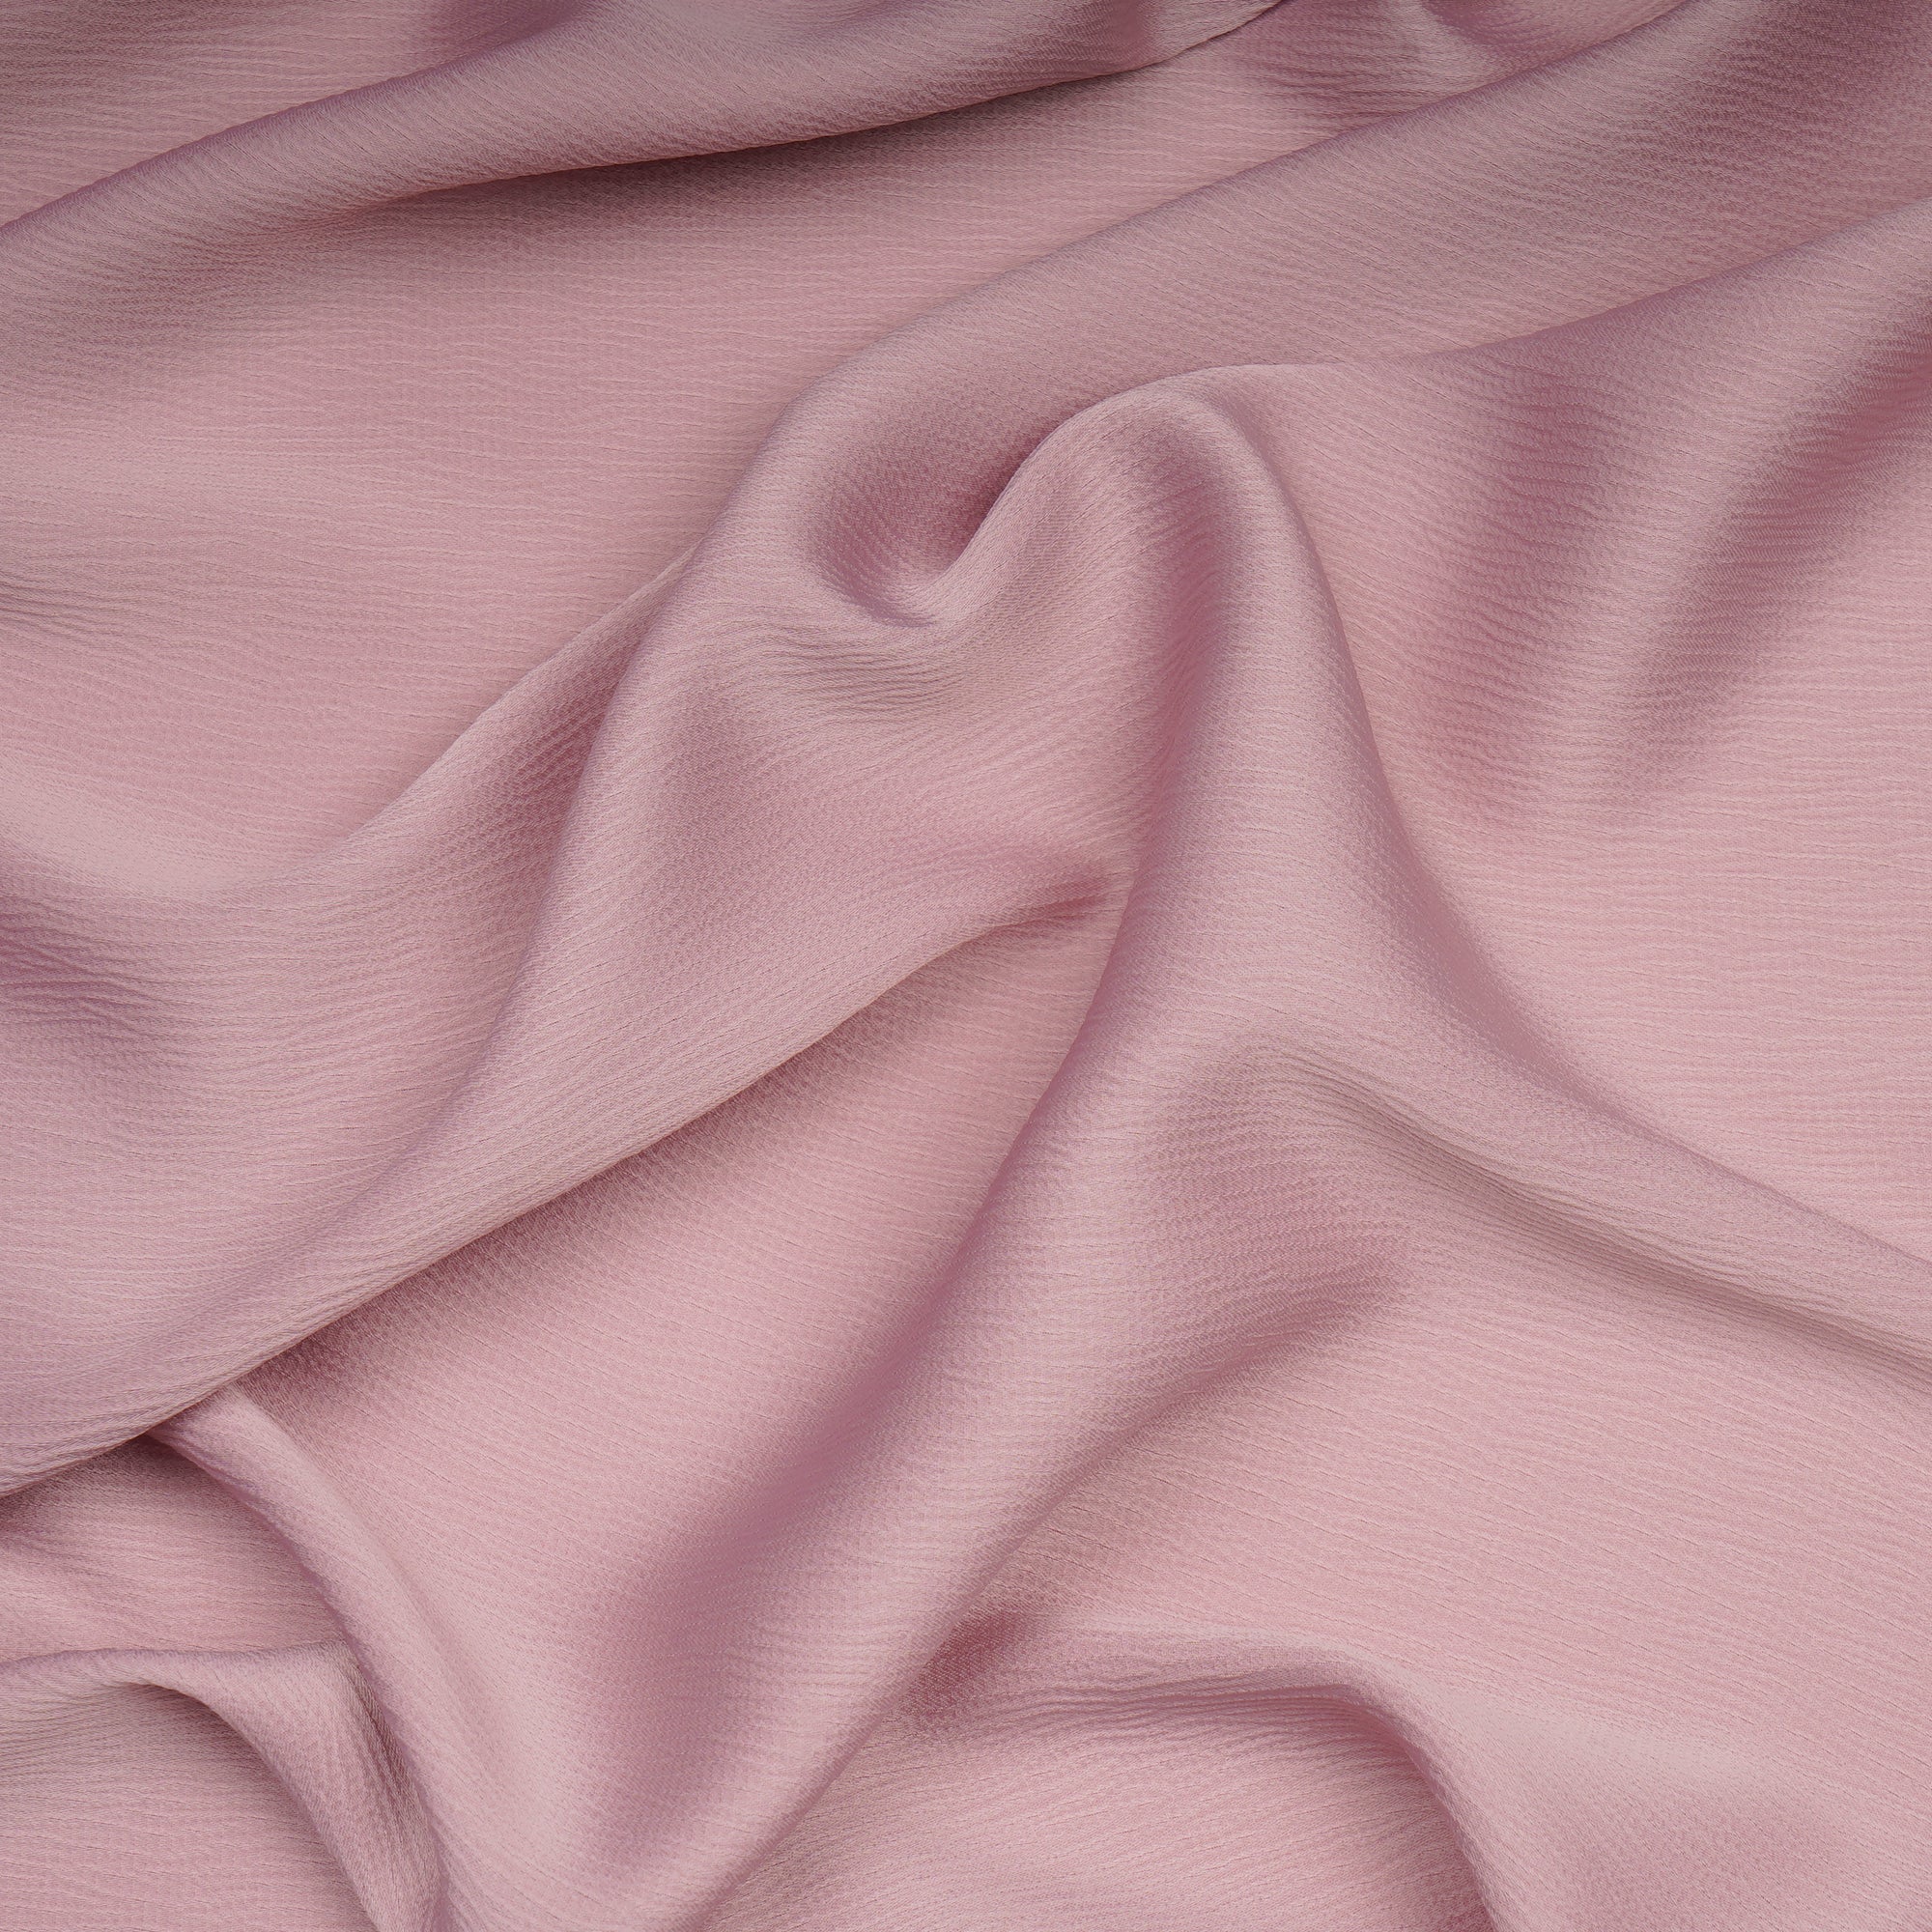 Peackskin Solid Dyed Imported Cocktail Satin Fabric (60" Width)